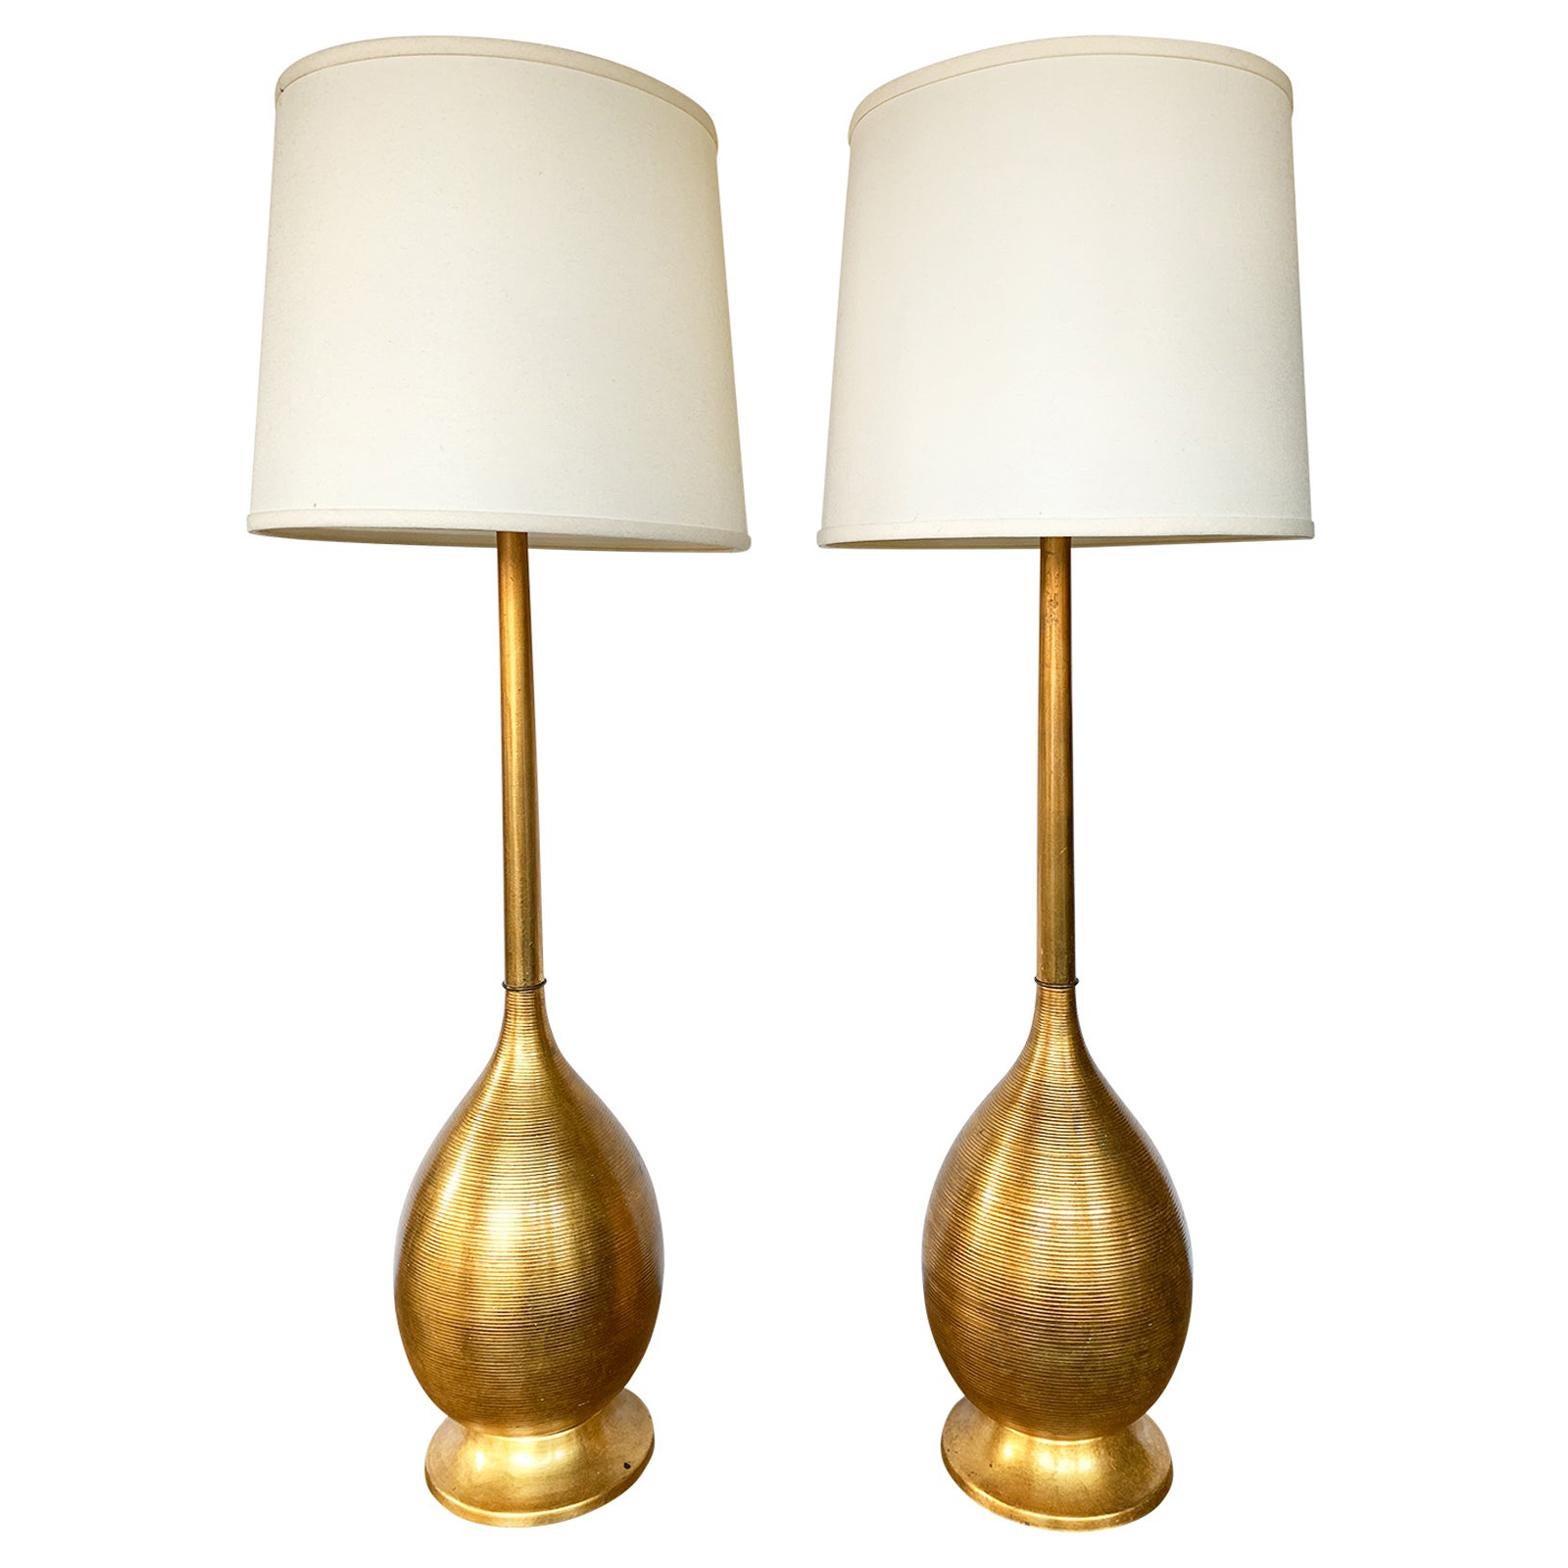 Pair of Hollywood Regency Style Gilt Table Lamps